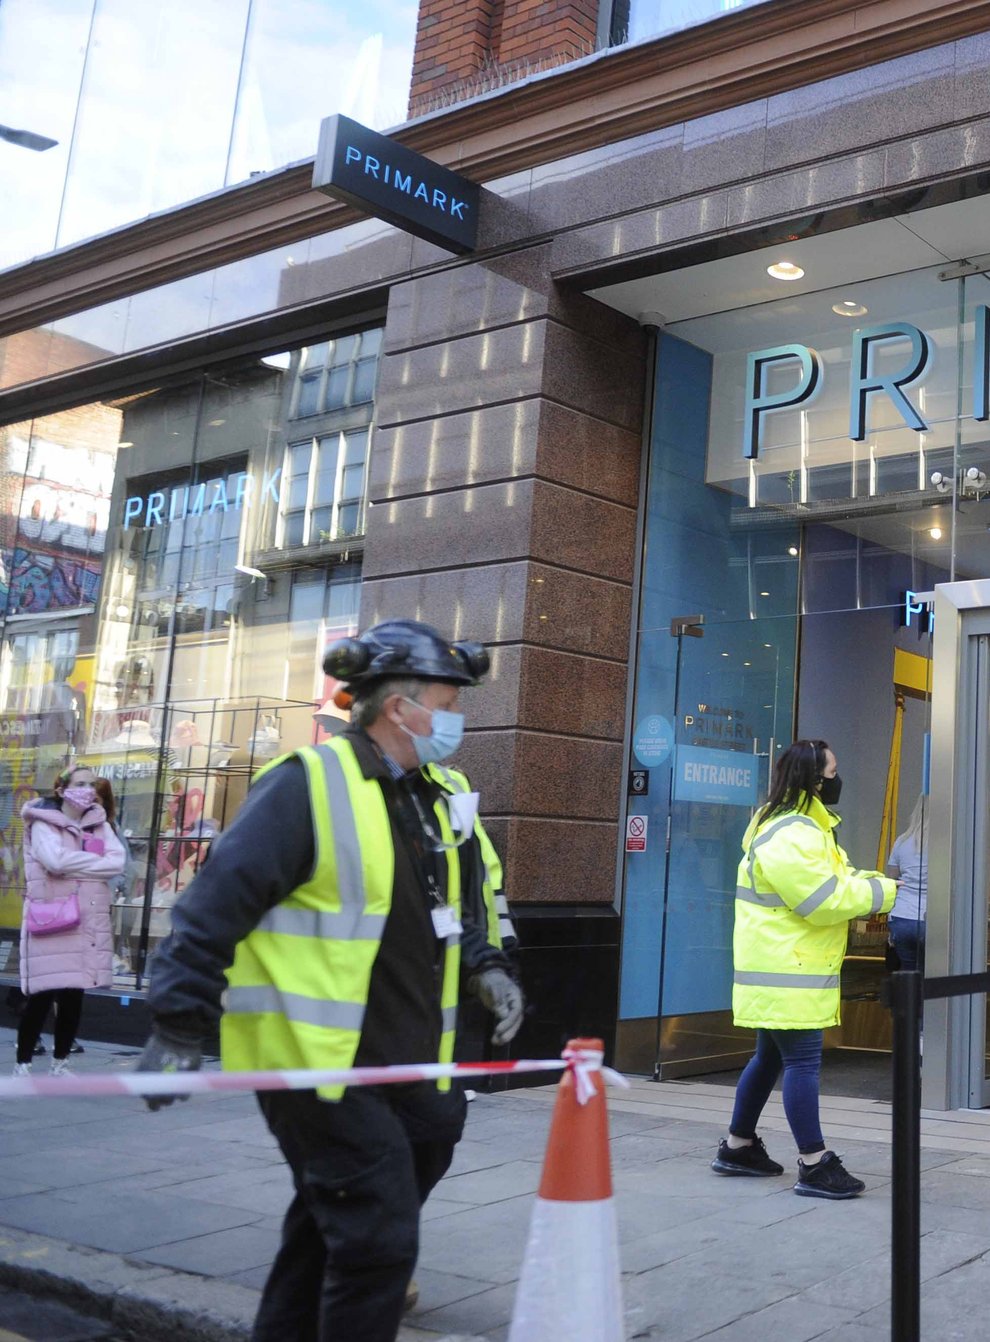 Primark is set to open more stores after a ‘good’ sales performance despite pandemic disruption (Mark Marlow/PA)